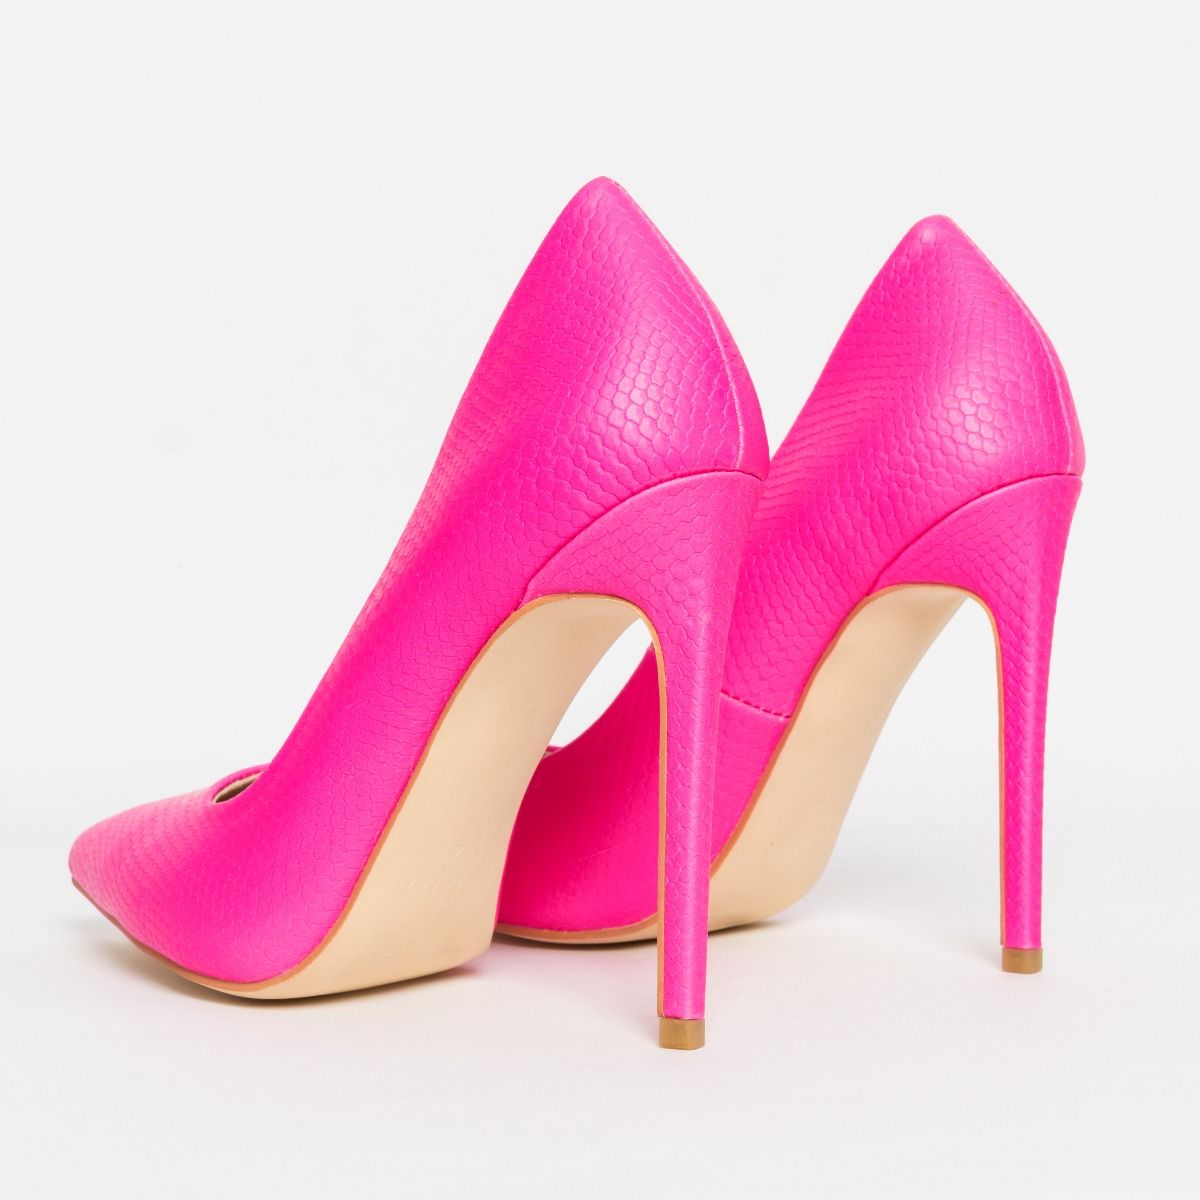 neon pink court shoes